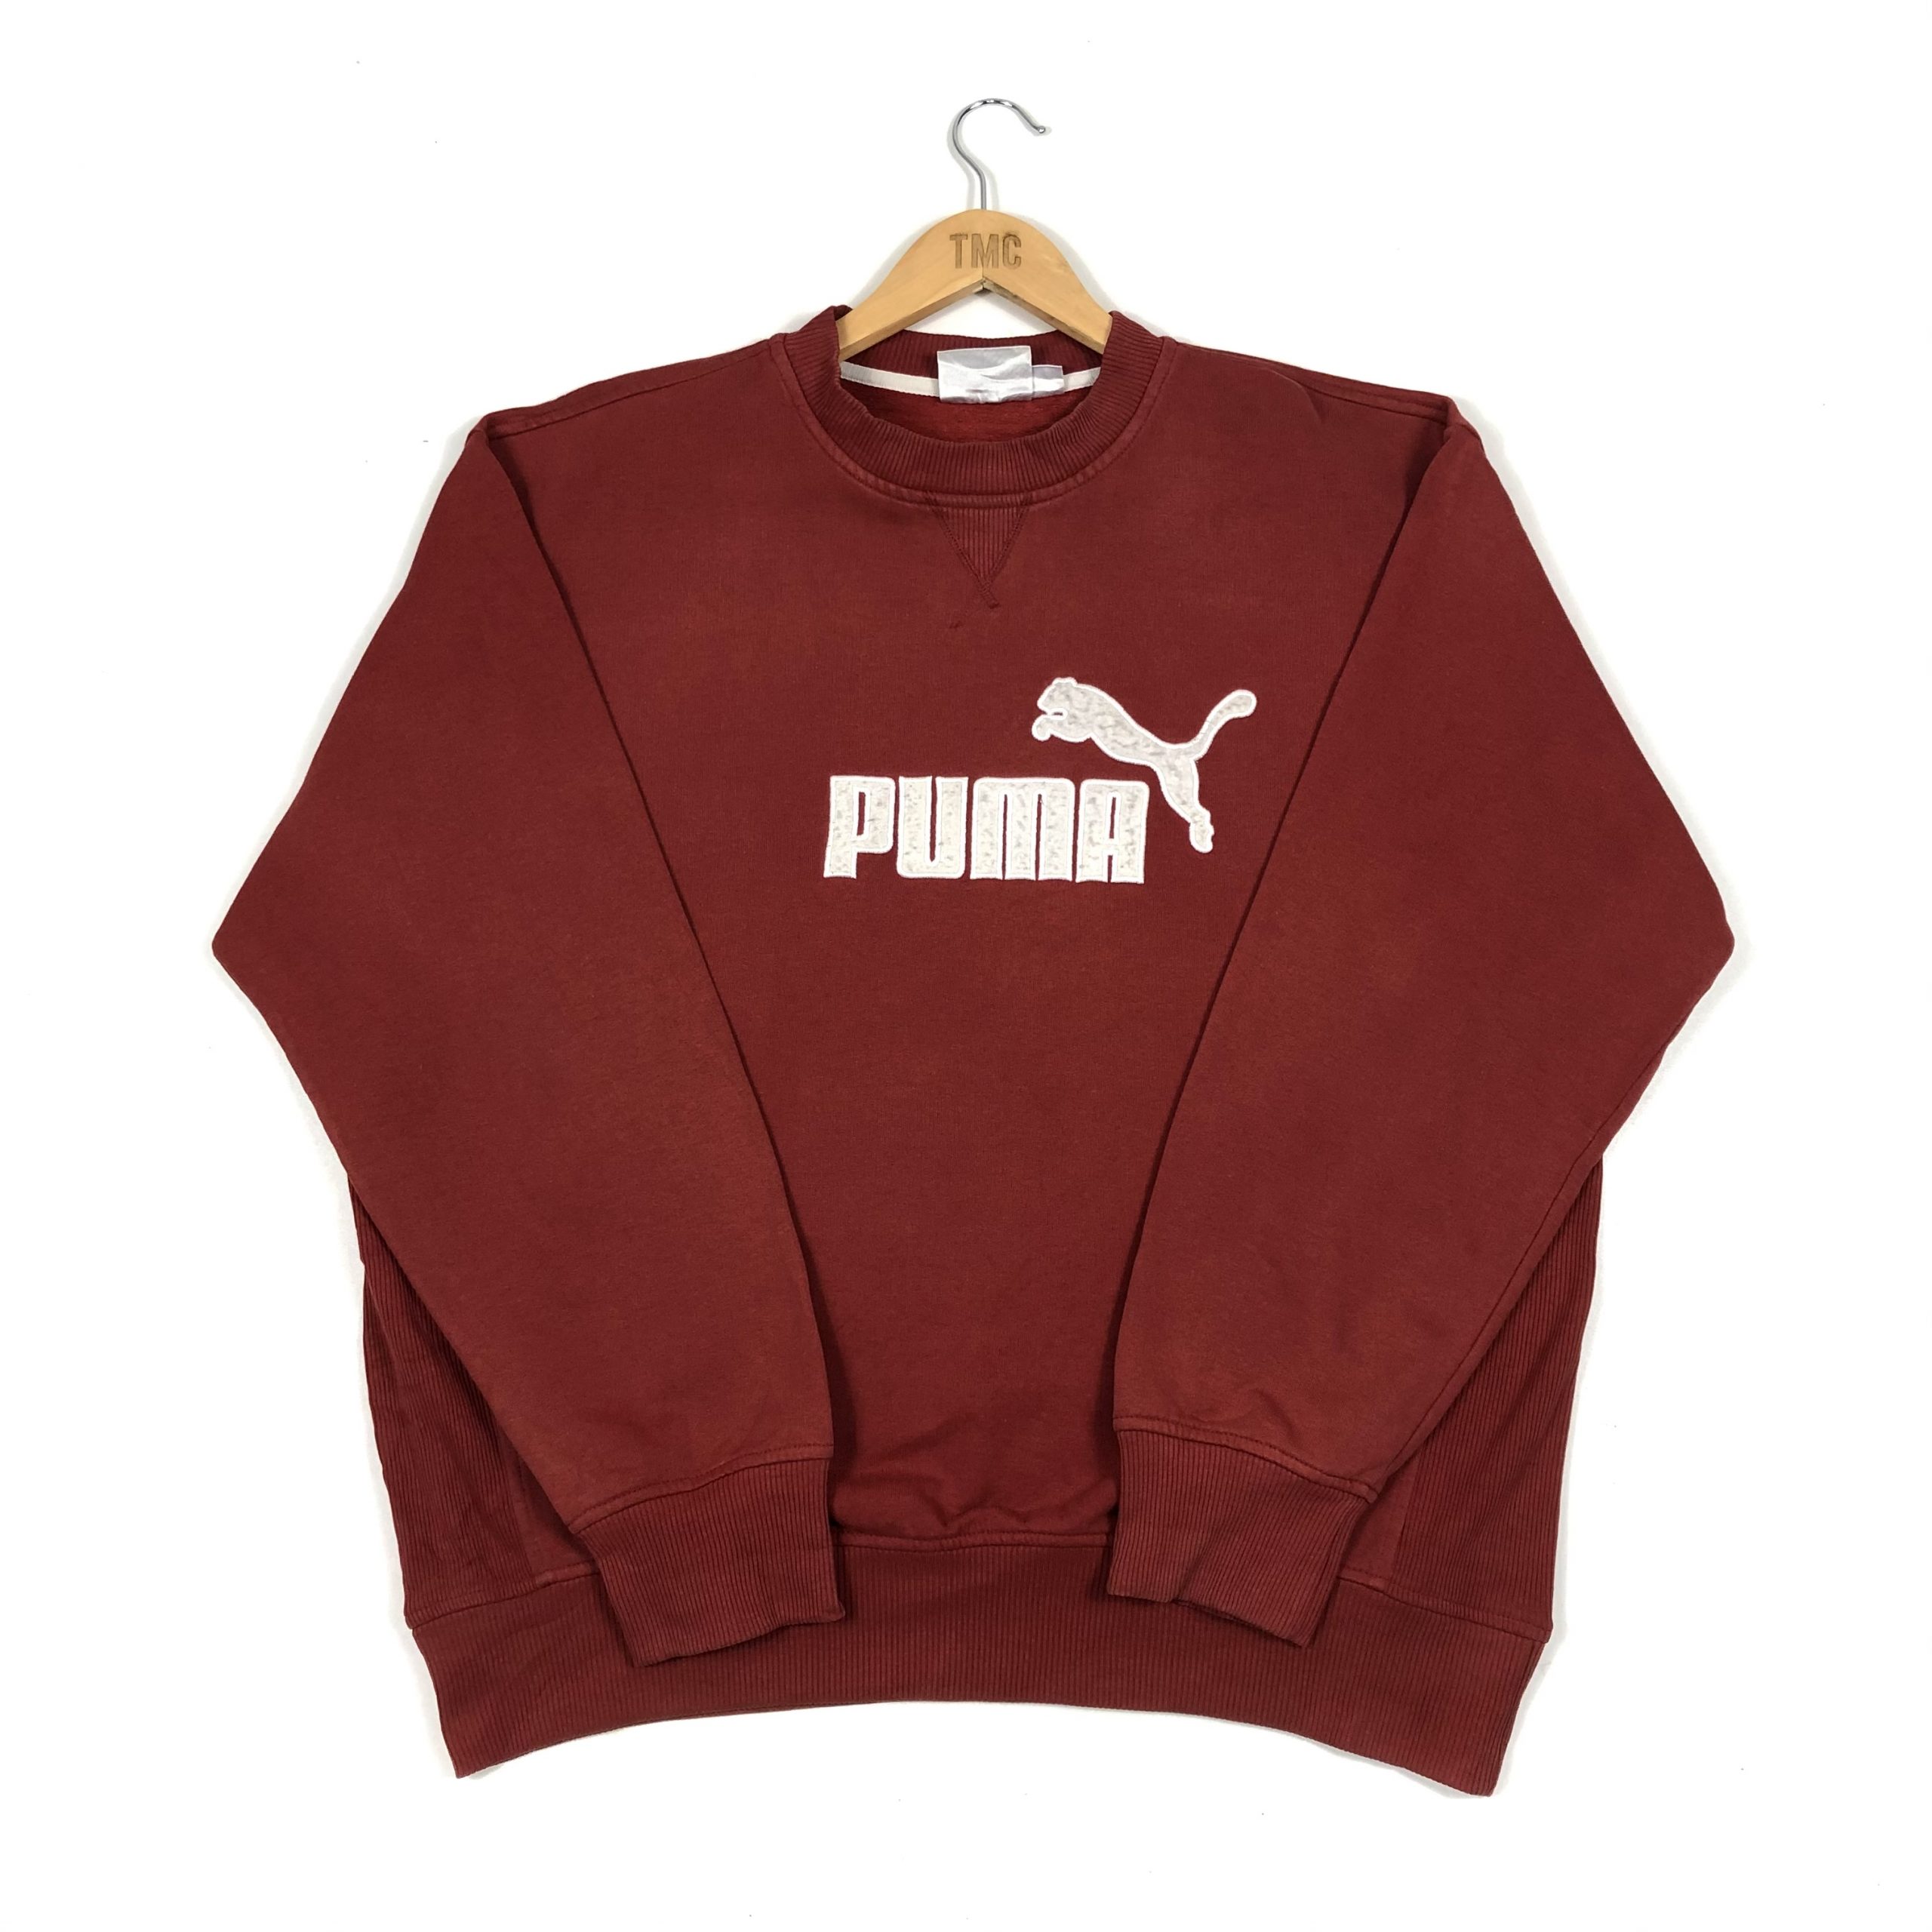 Puma Embroidered Spell Out Sweatshirt - Red - XL - TMC Vintage ...